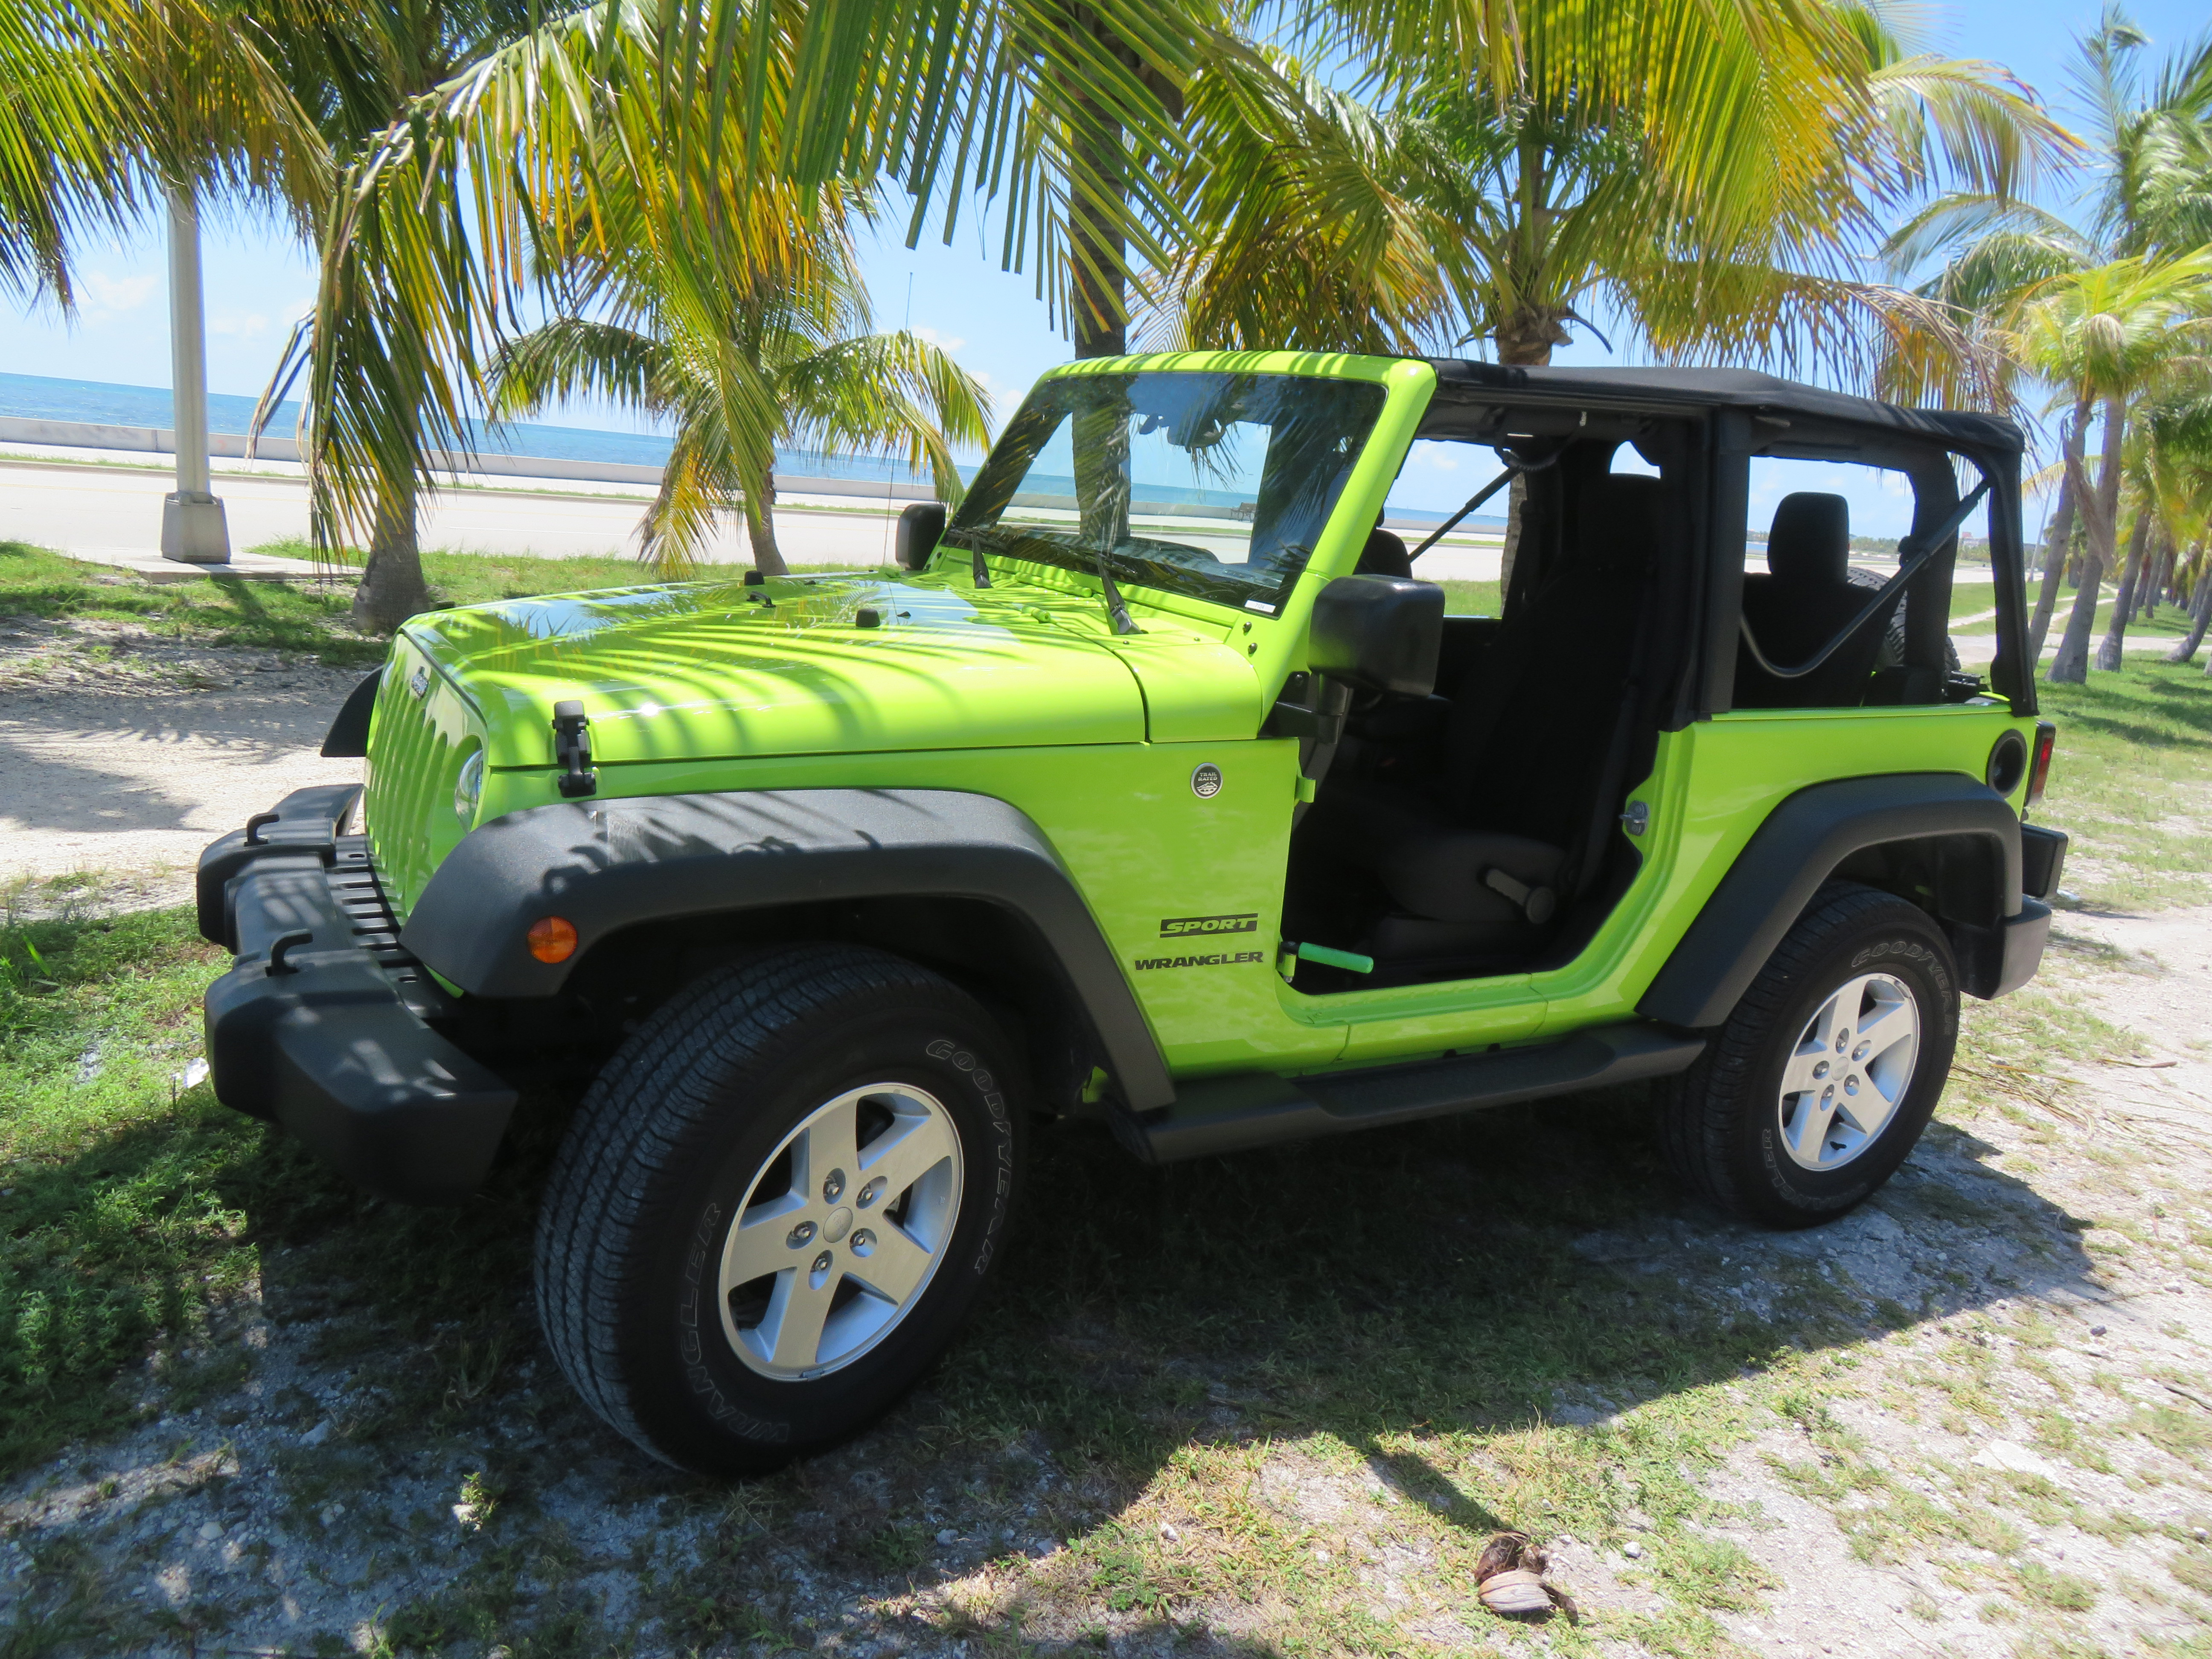 Jeep Models Available To Rent In Key West